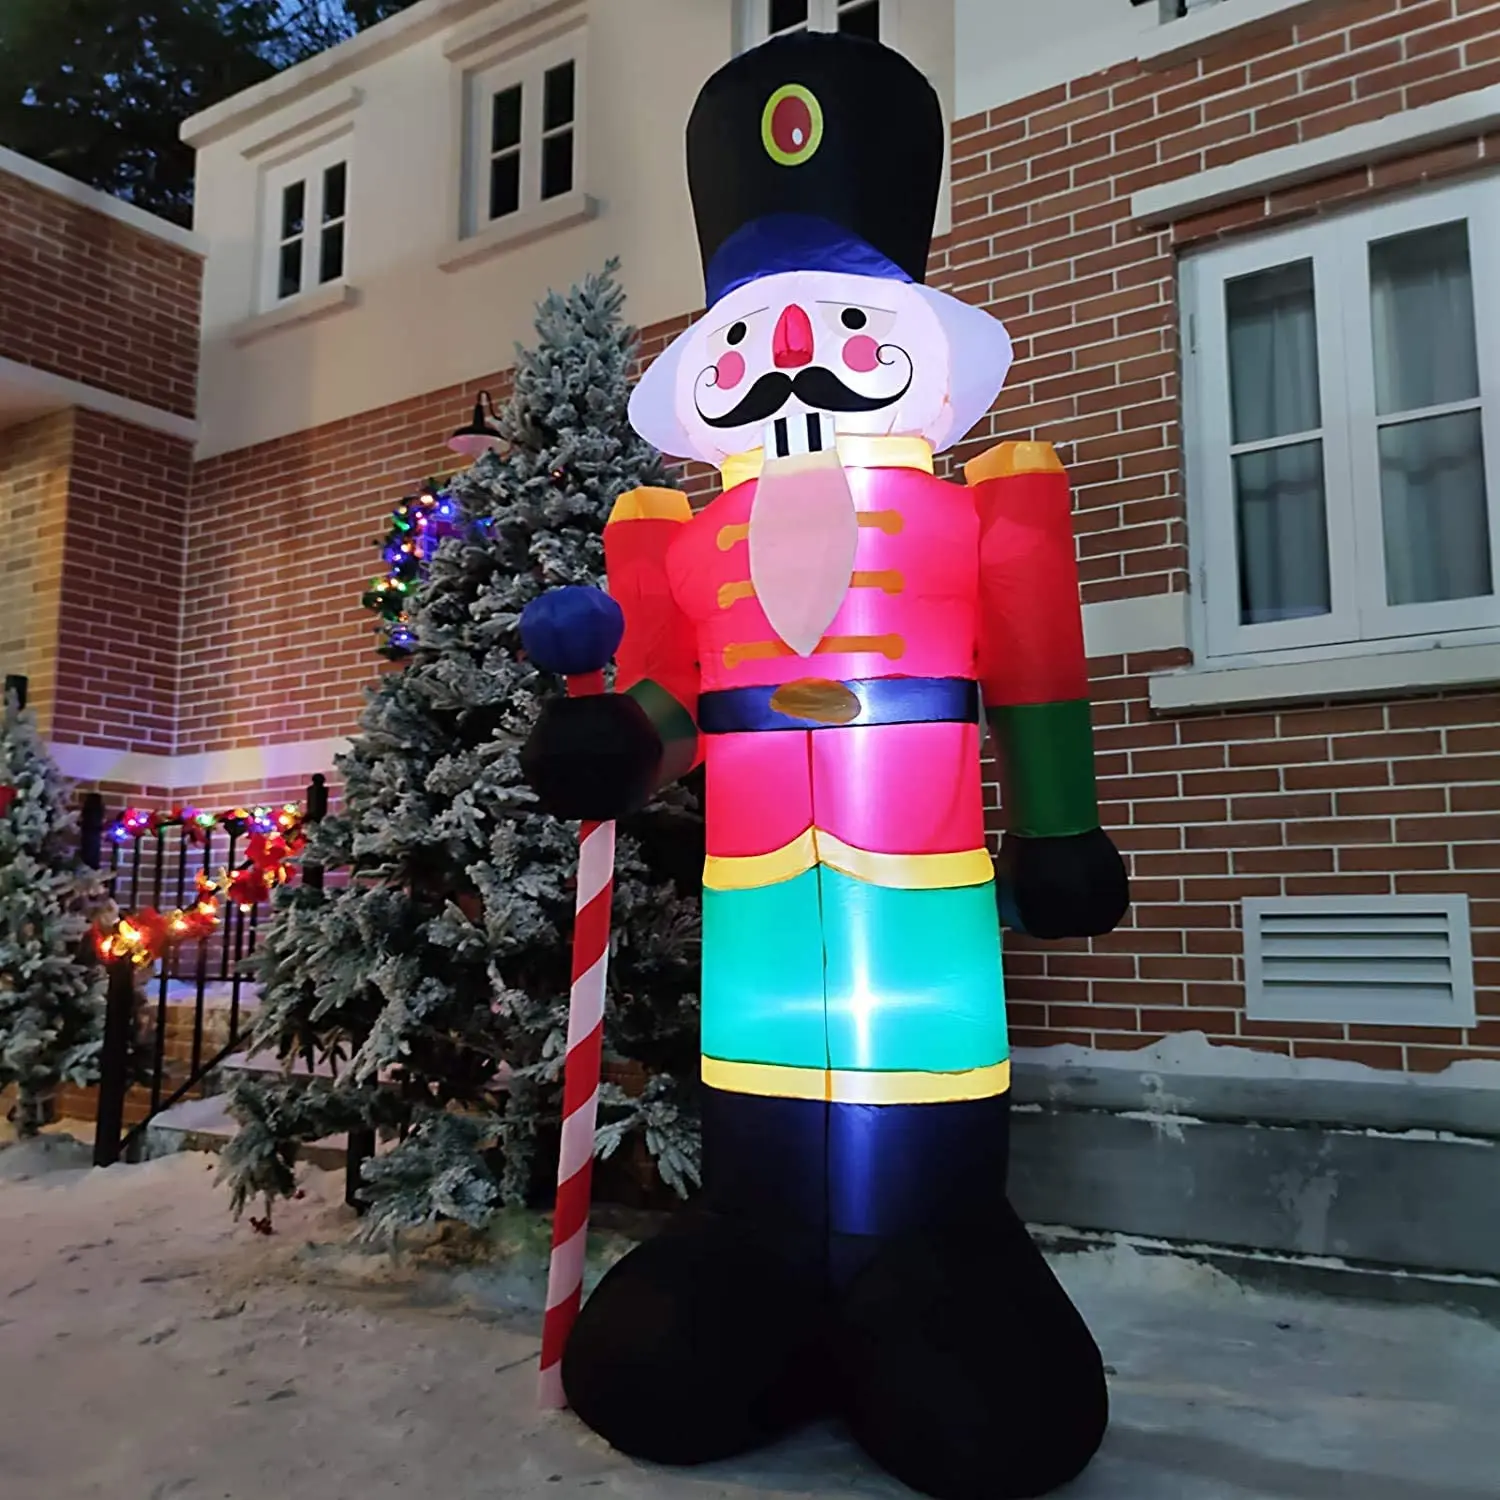 Riiai 8 Feet Christmas Inflatable Nutcracker Soldier,Xmas Blow Up Lighted Yard Decoration with 3 LED Lights,Outdoor Garden Yard Holiday Party Decor 